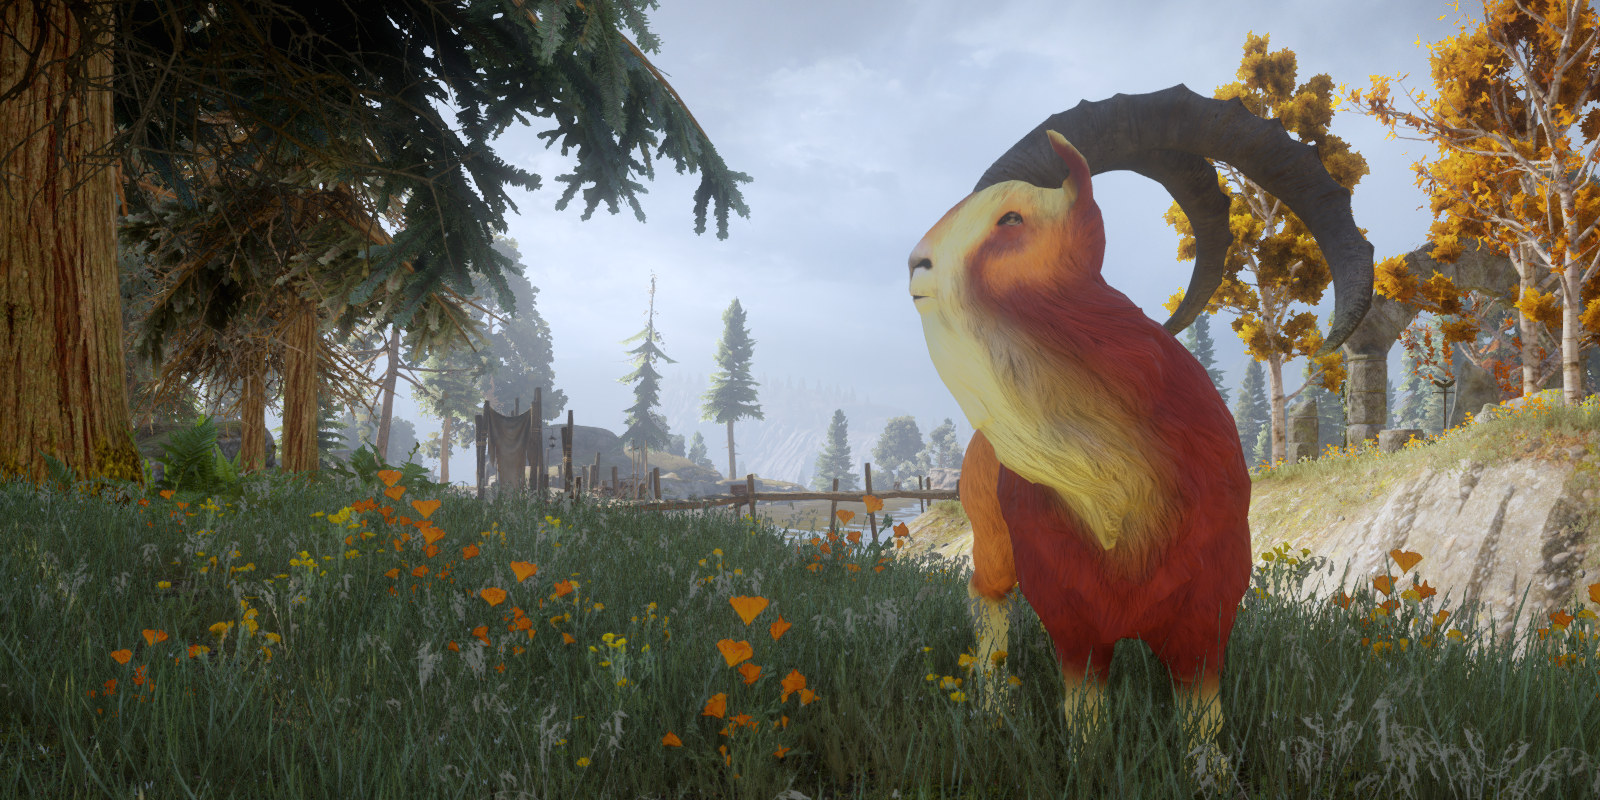 Lord Woolsley wanders a field in Dragon Age: Inquisition